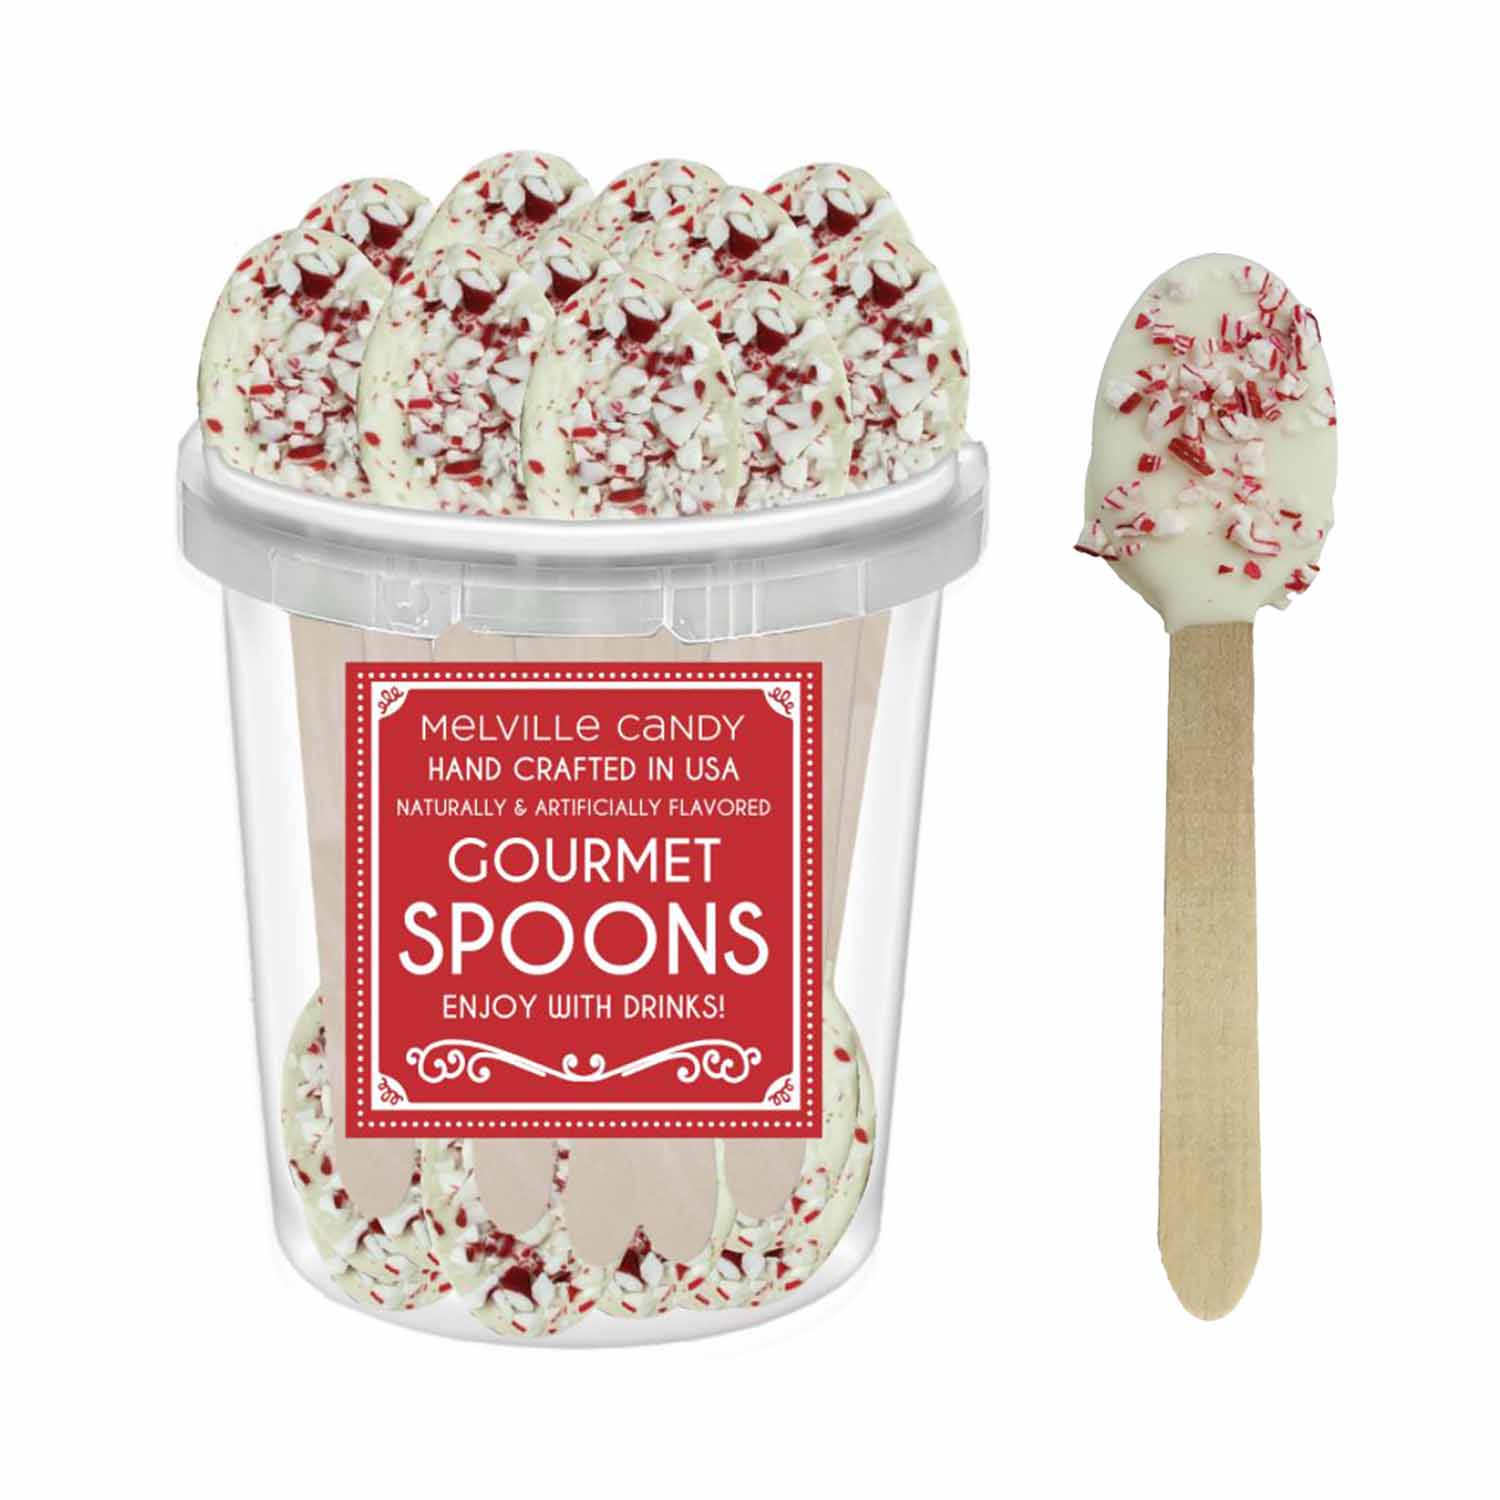 White Chocolate Peppermint Dipped Spoons